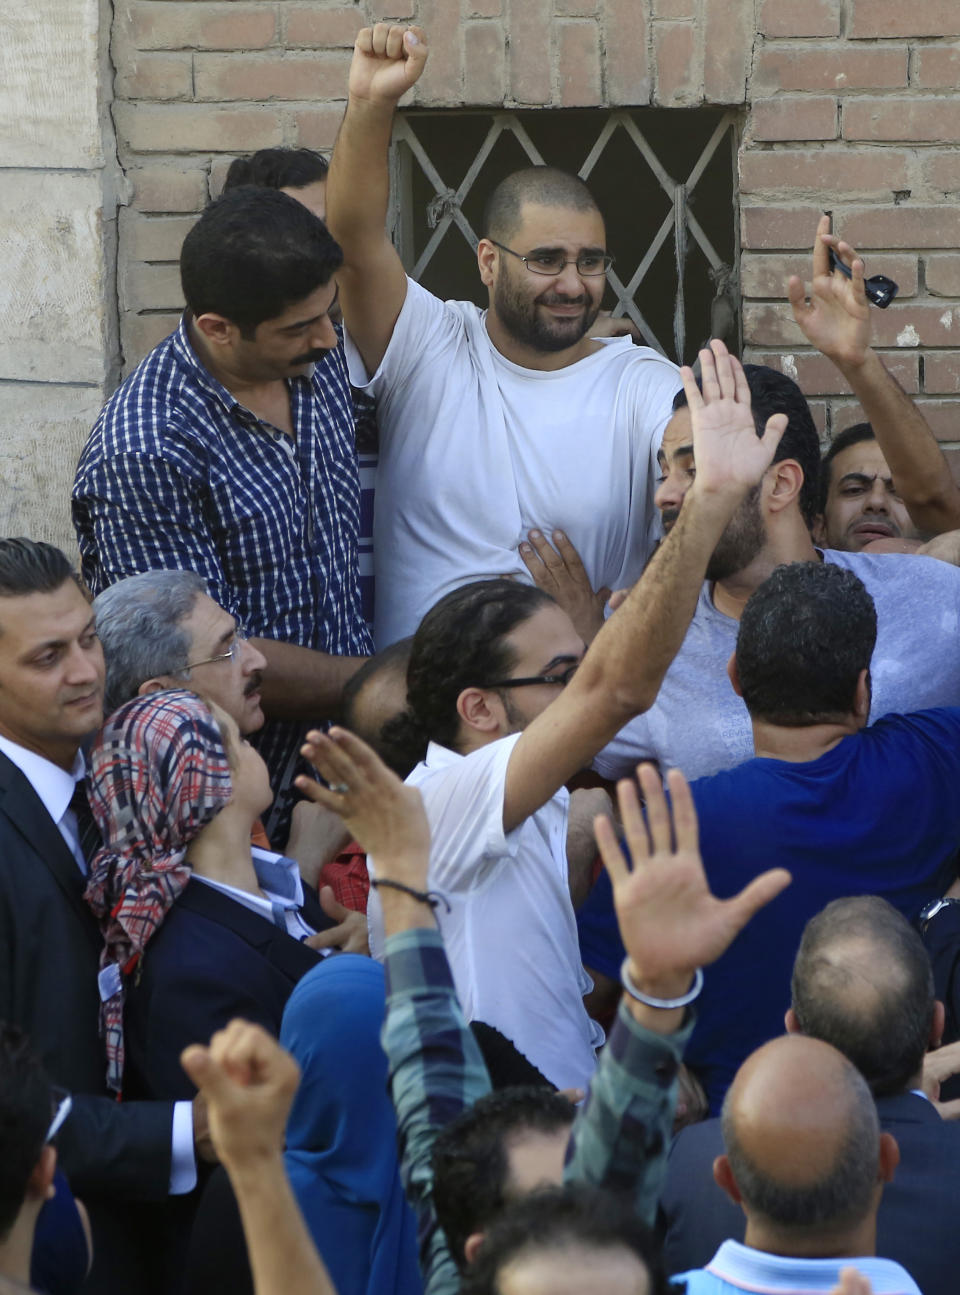 FILE - In this Aug. 28, 2014 file photo, surrounded by plainclothes policemen, Egyptian prominent blogger Alaa Abdel-Fattah waves to the crowd after attending the funeral of his father, Ahmed Seif, in Cairo, Egypt. A leading Egyptian pro-democracy activist was released from prison early Friday March 29, 2019, after serving a five-year sentence for inciting and taking part in protests, his family and lawyer said. (AP Photo/Hassan Ammar, File)